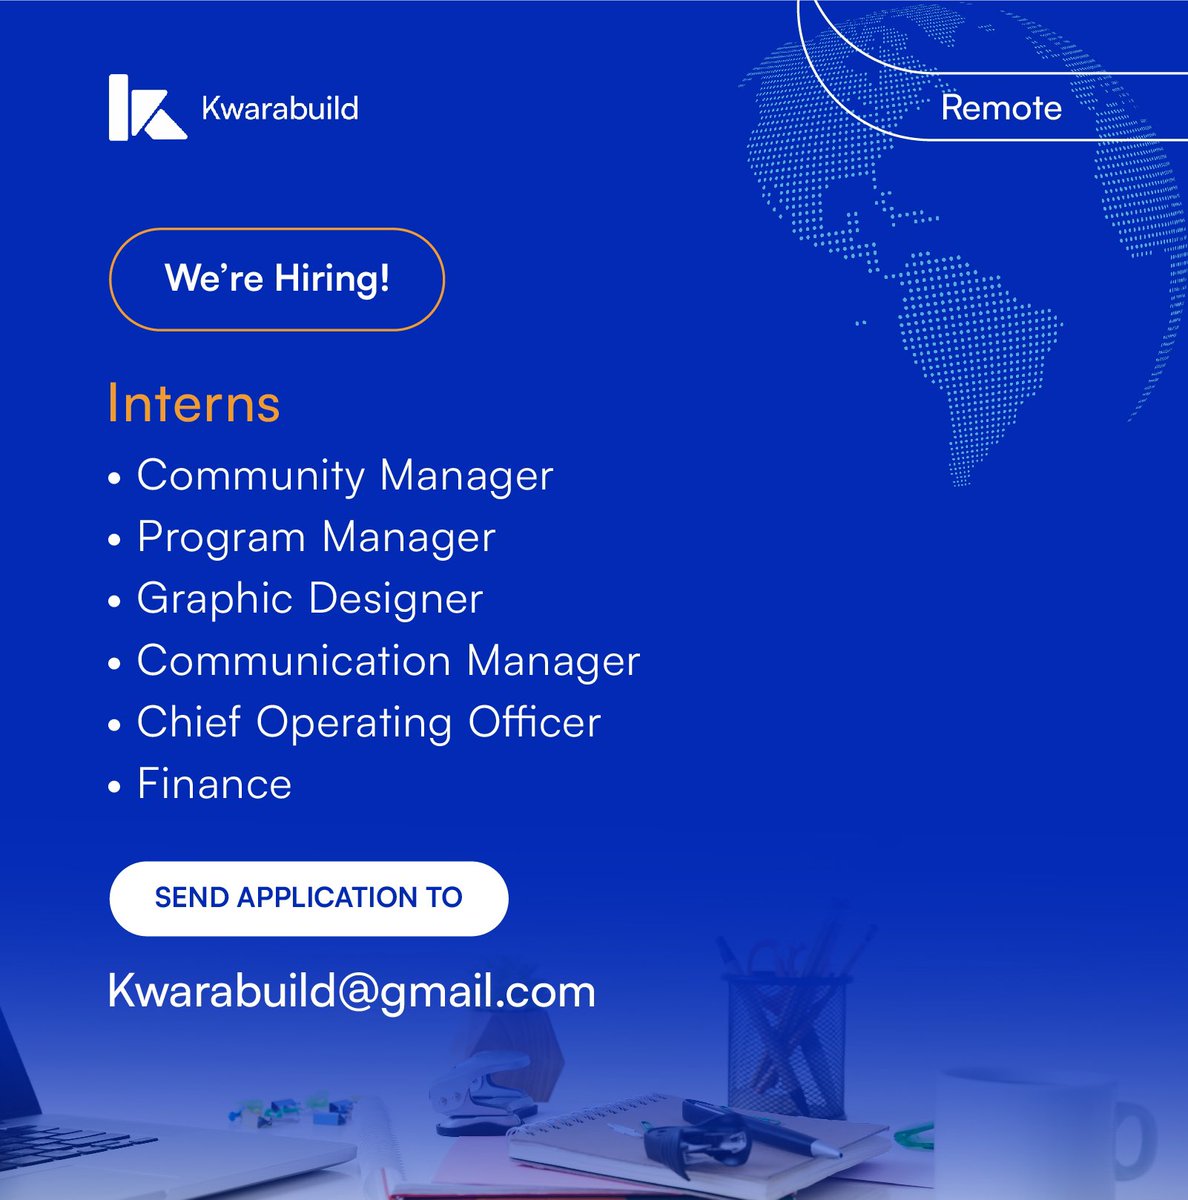 We're hiring for multiple intern roles at Kwarabuild. Join us in making it easy for everyone to get empowered with technology innovation in Nigeria. 

To apply, send your application to kwarabuild@gmail.com

#innovateNow #volunteerRole